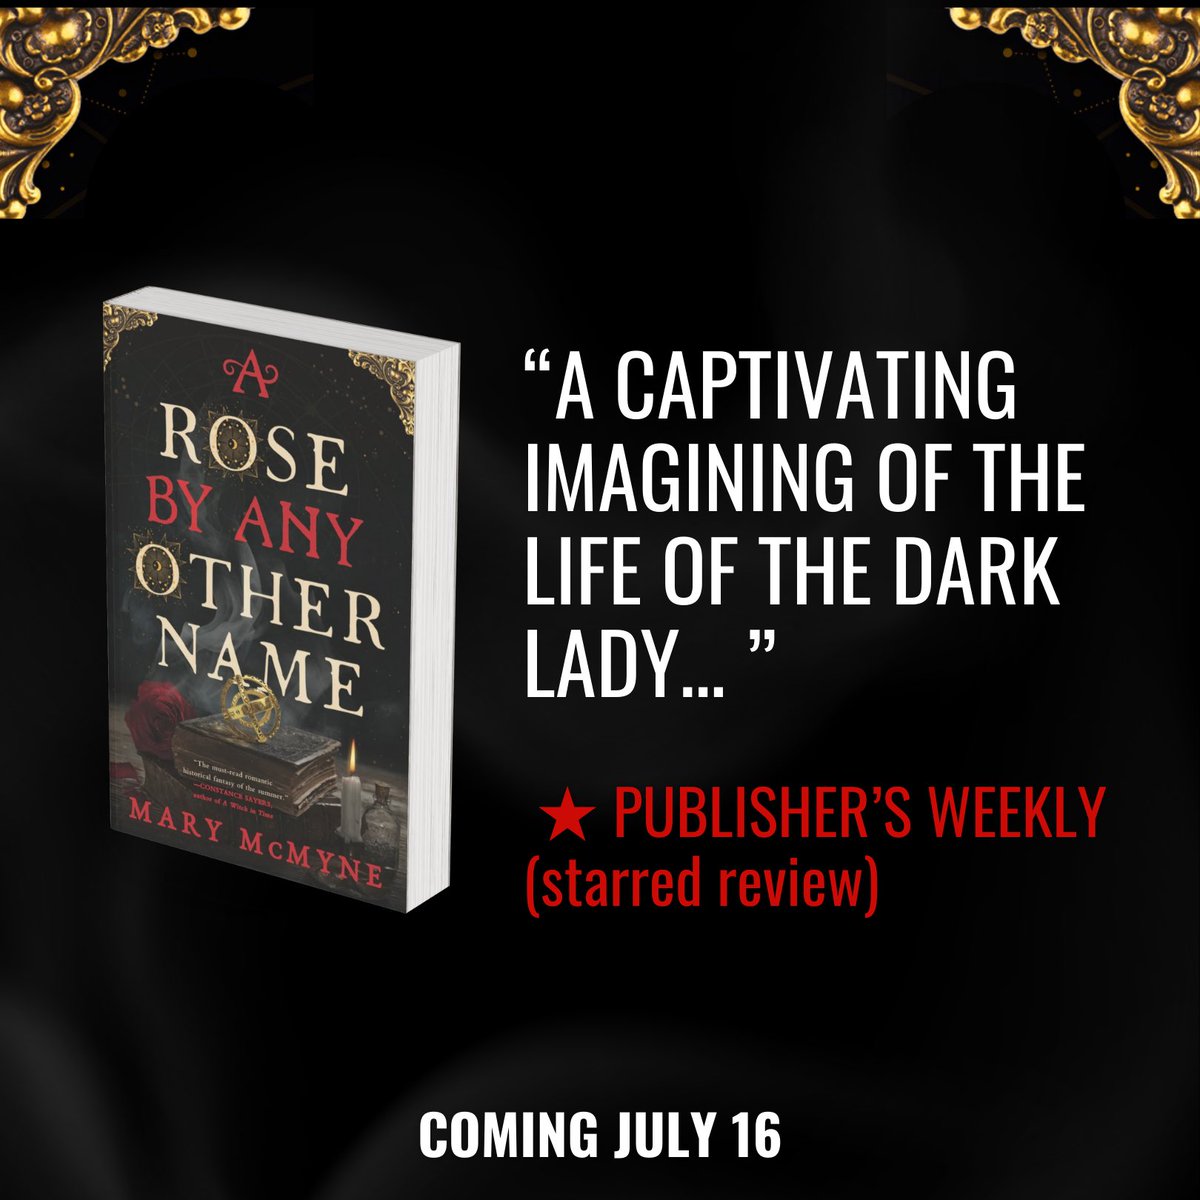 Y’all, I’m thrilled to share that my witchy historical A ROSE BY ANY OTHER NAME has received a ⭐️STARRED⭐️ review from @PublishersWkly! This novel is the result of many early morning writing sessions in the dark. It means the world when readers “get” it! publishersweekly.com/9780316393515